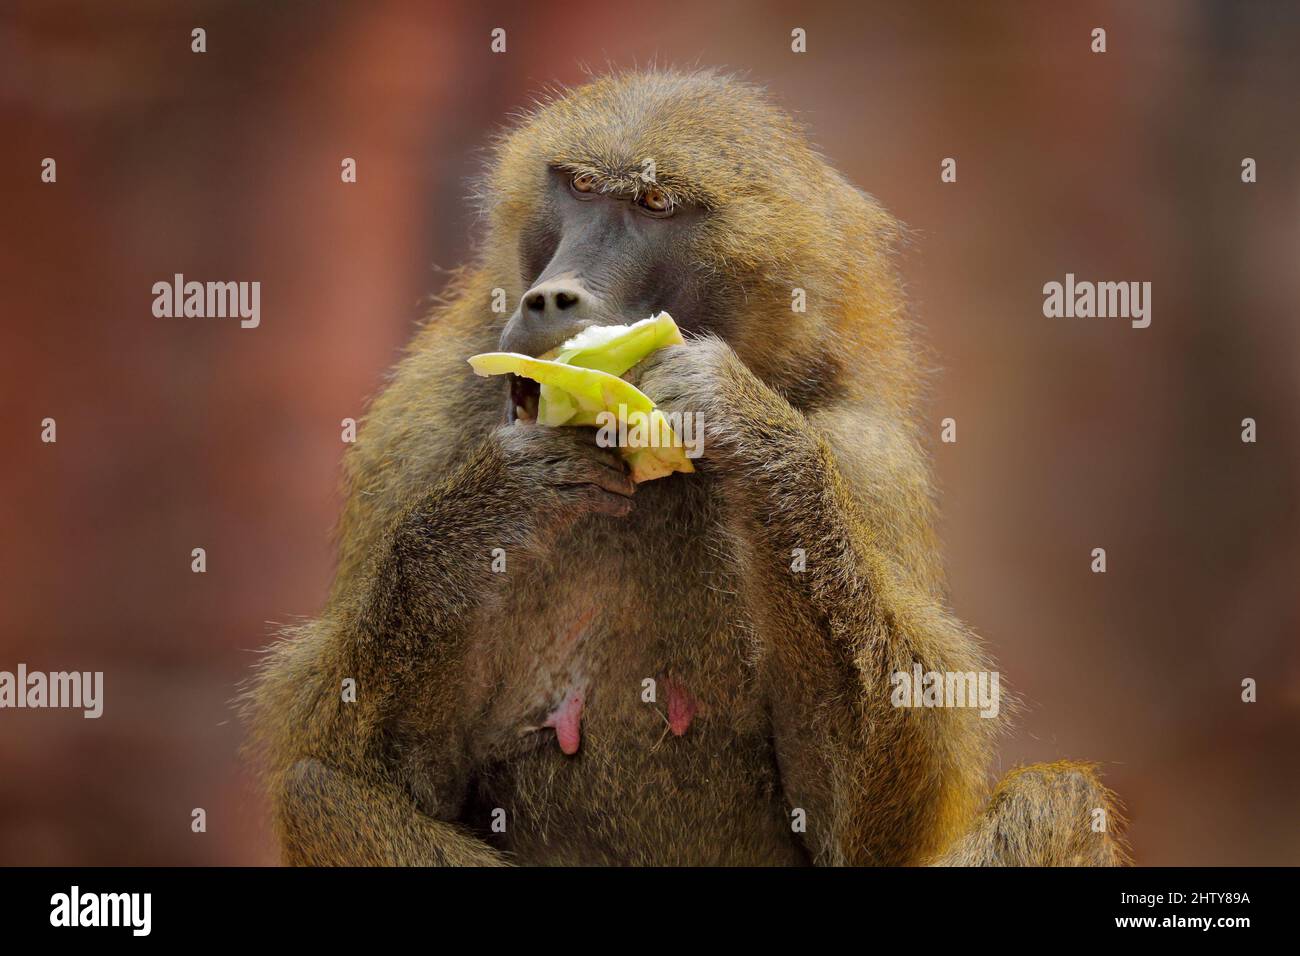 Guinea baboon, Papio papio, monkey from Guinea, Senegal and Gambia. Detail of wild mammal in the nature habitat. Monkey feeding fruits in the green ve Stock Photo